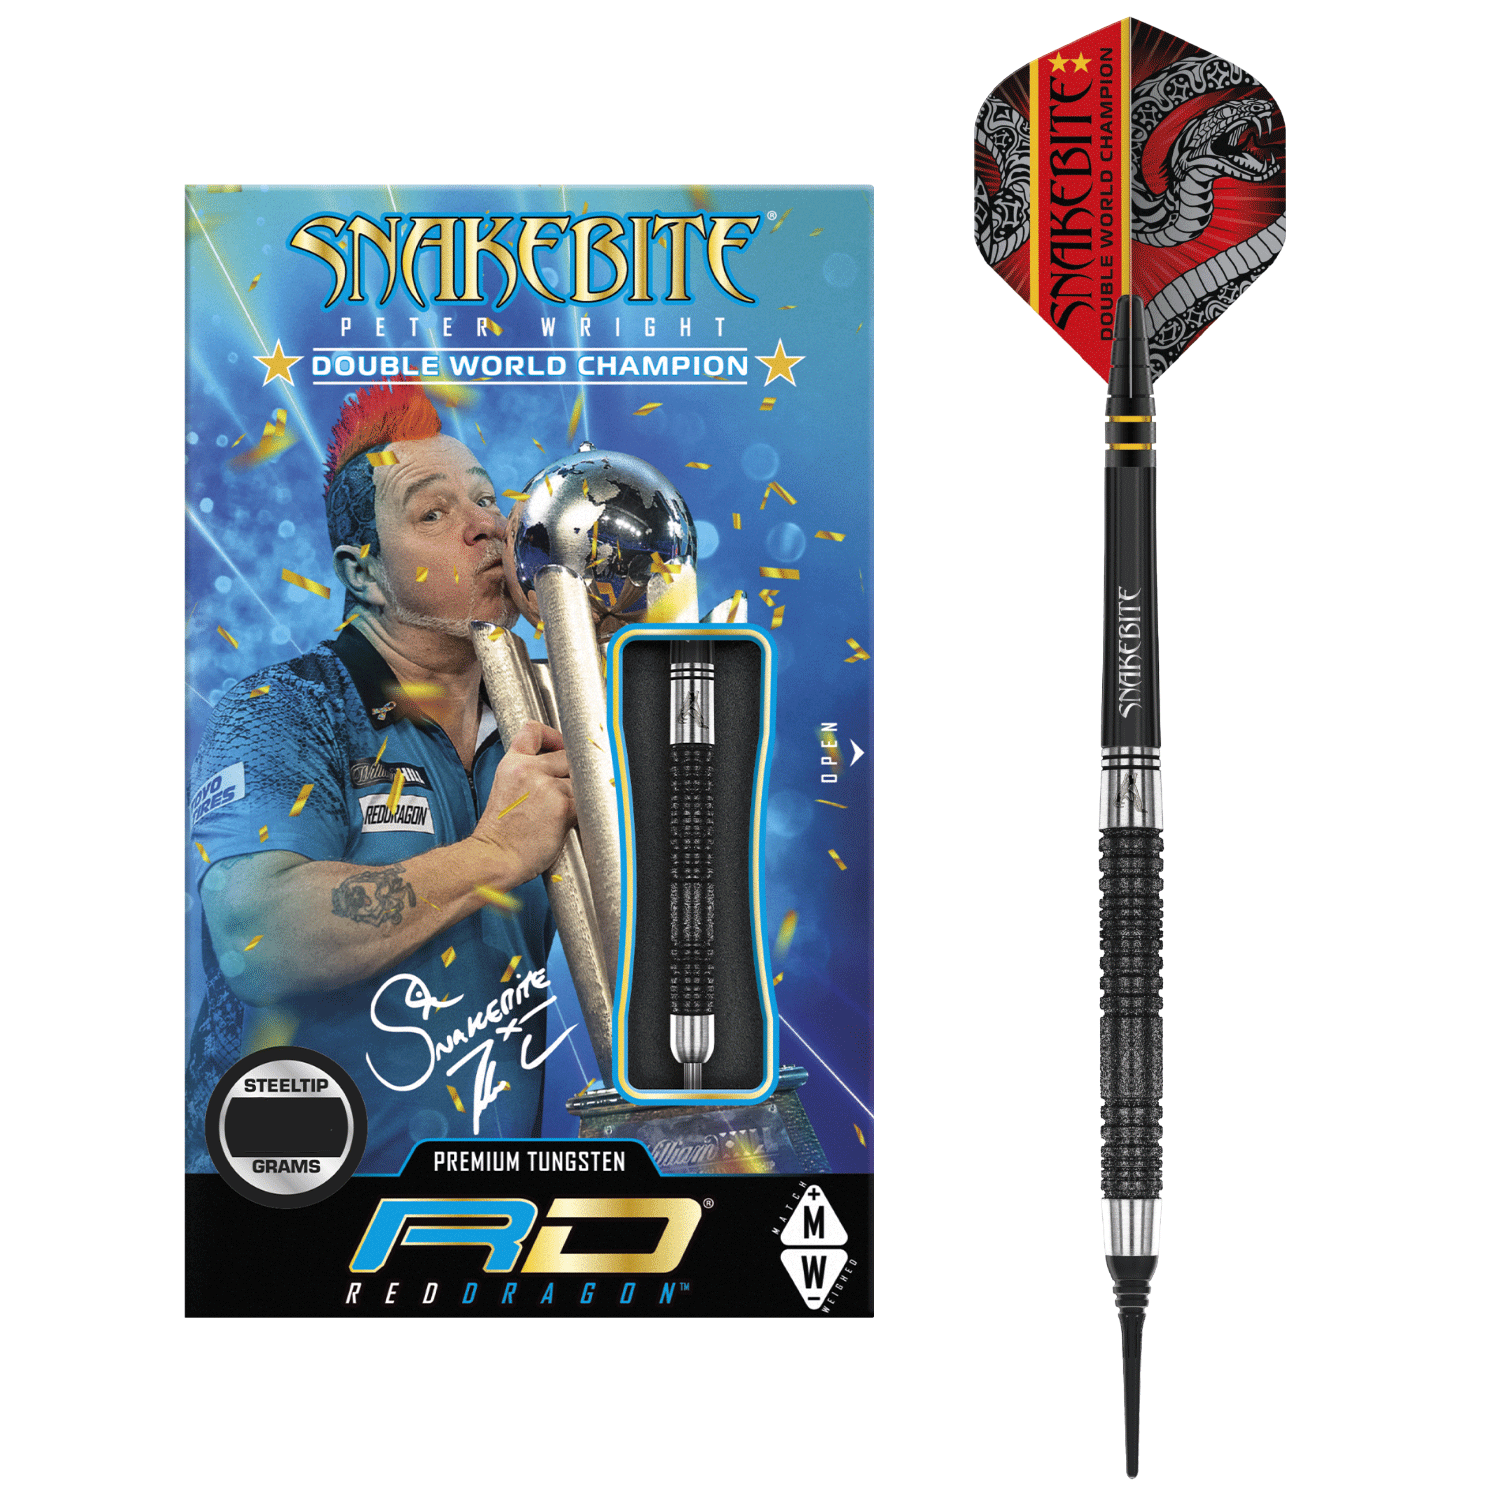 RED DRAGON - Peter Wright Snakebite PL15: Steeltip Tungsten Fléchettes  Professional 